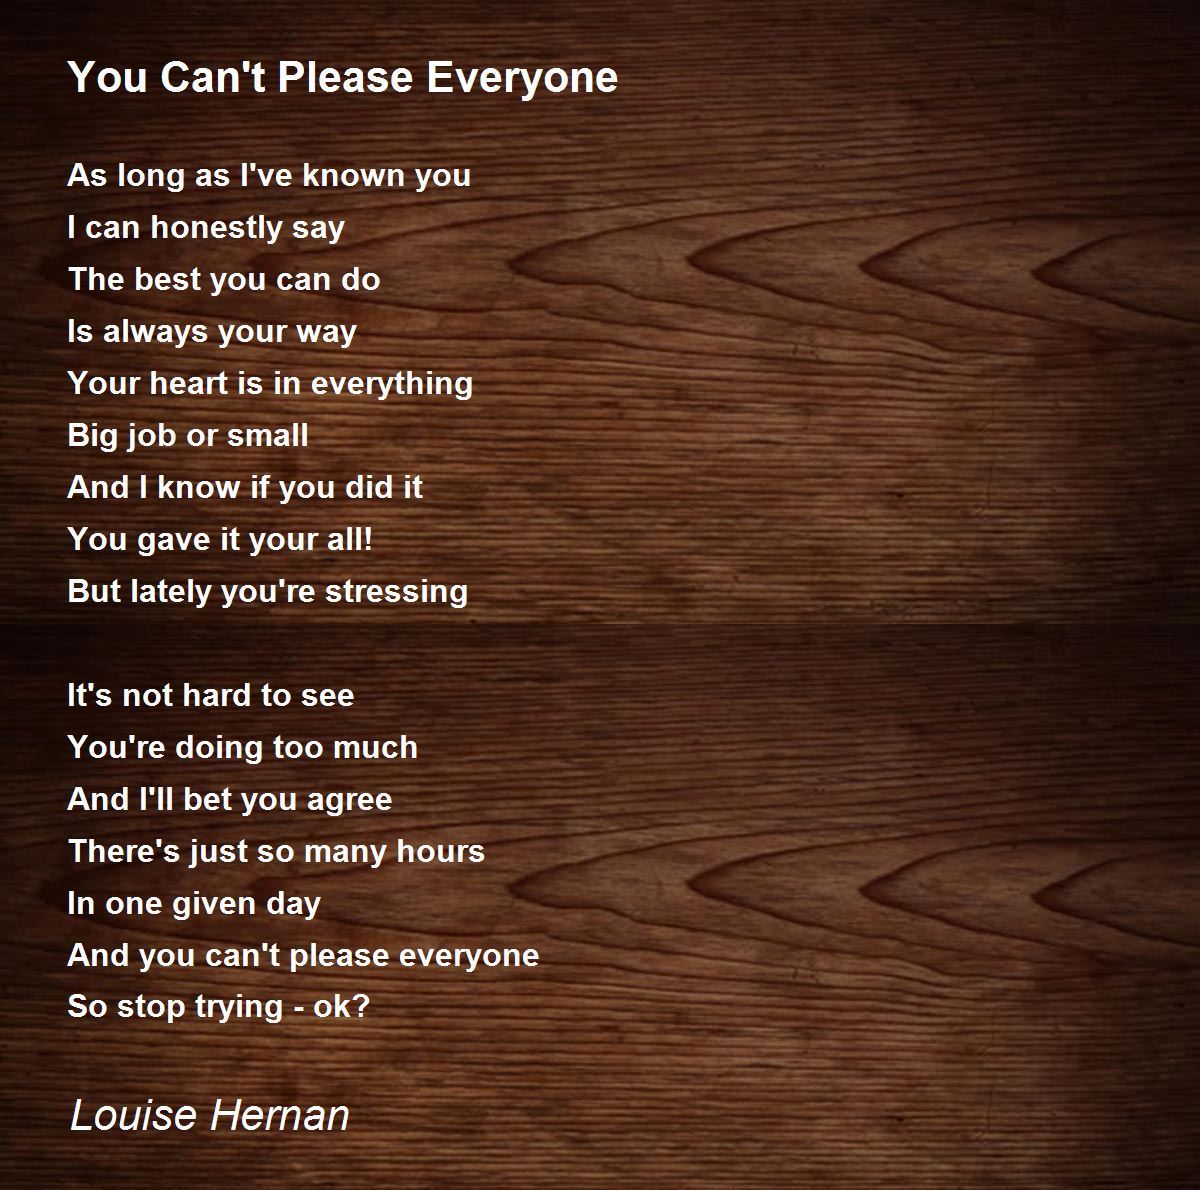 https://img.poemhunter.com/i/poem_images/231/you-cant-please-everyone.jpg